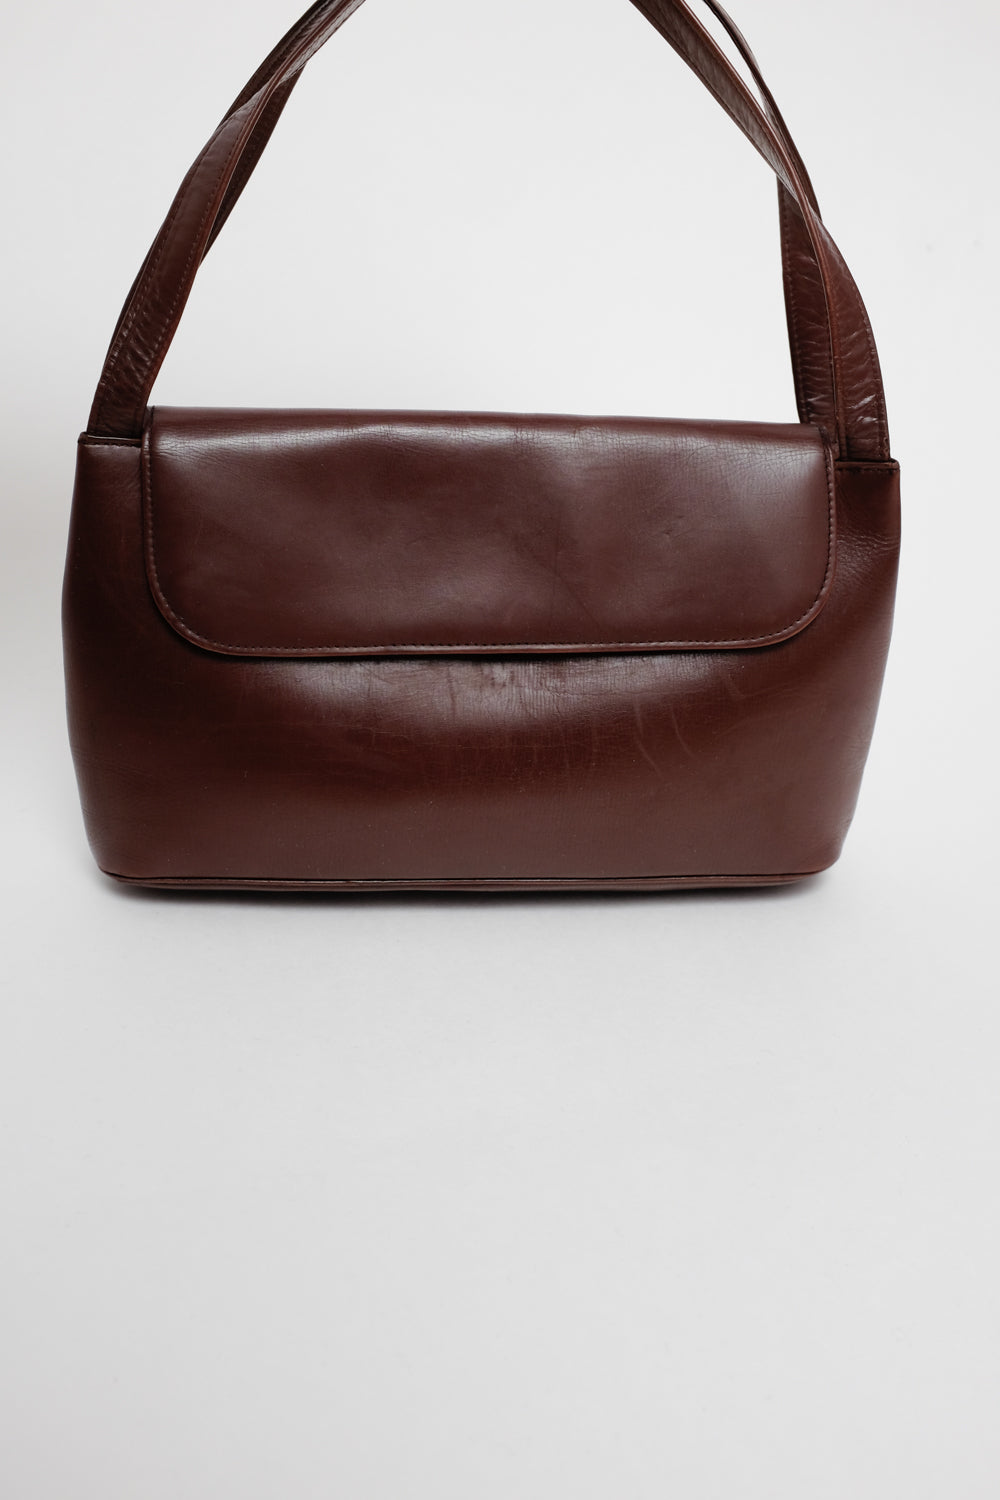 BROWN VINTAGE SMALL LEATHER BAG